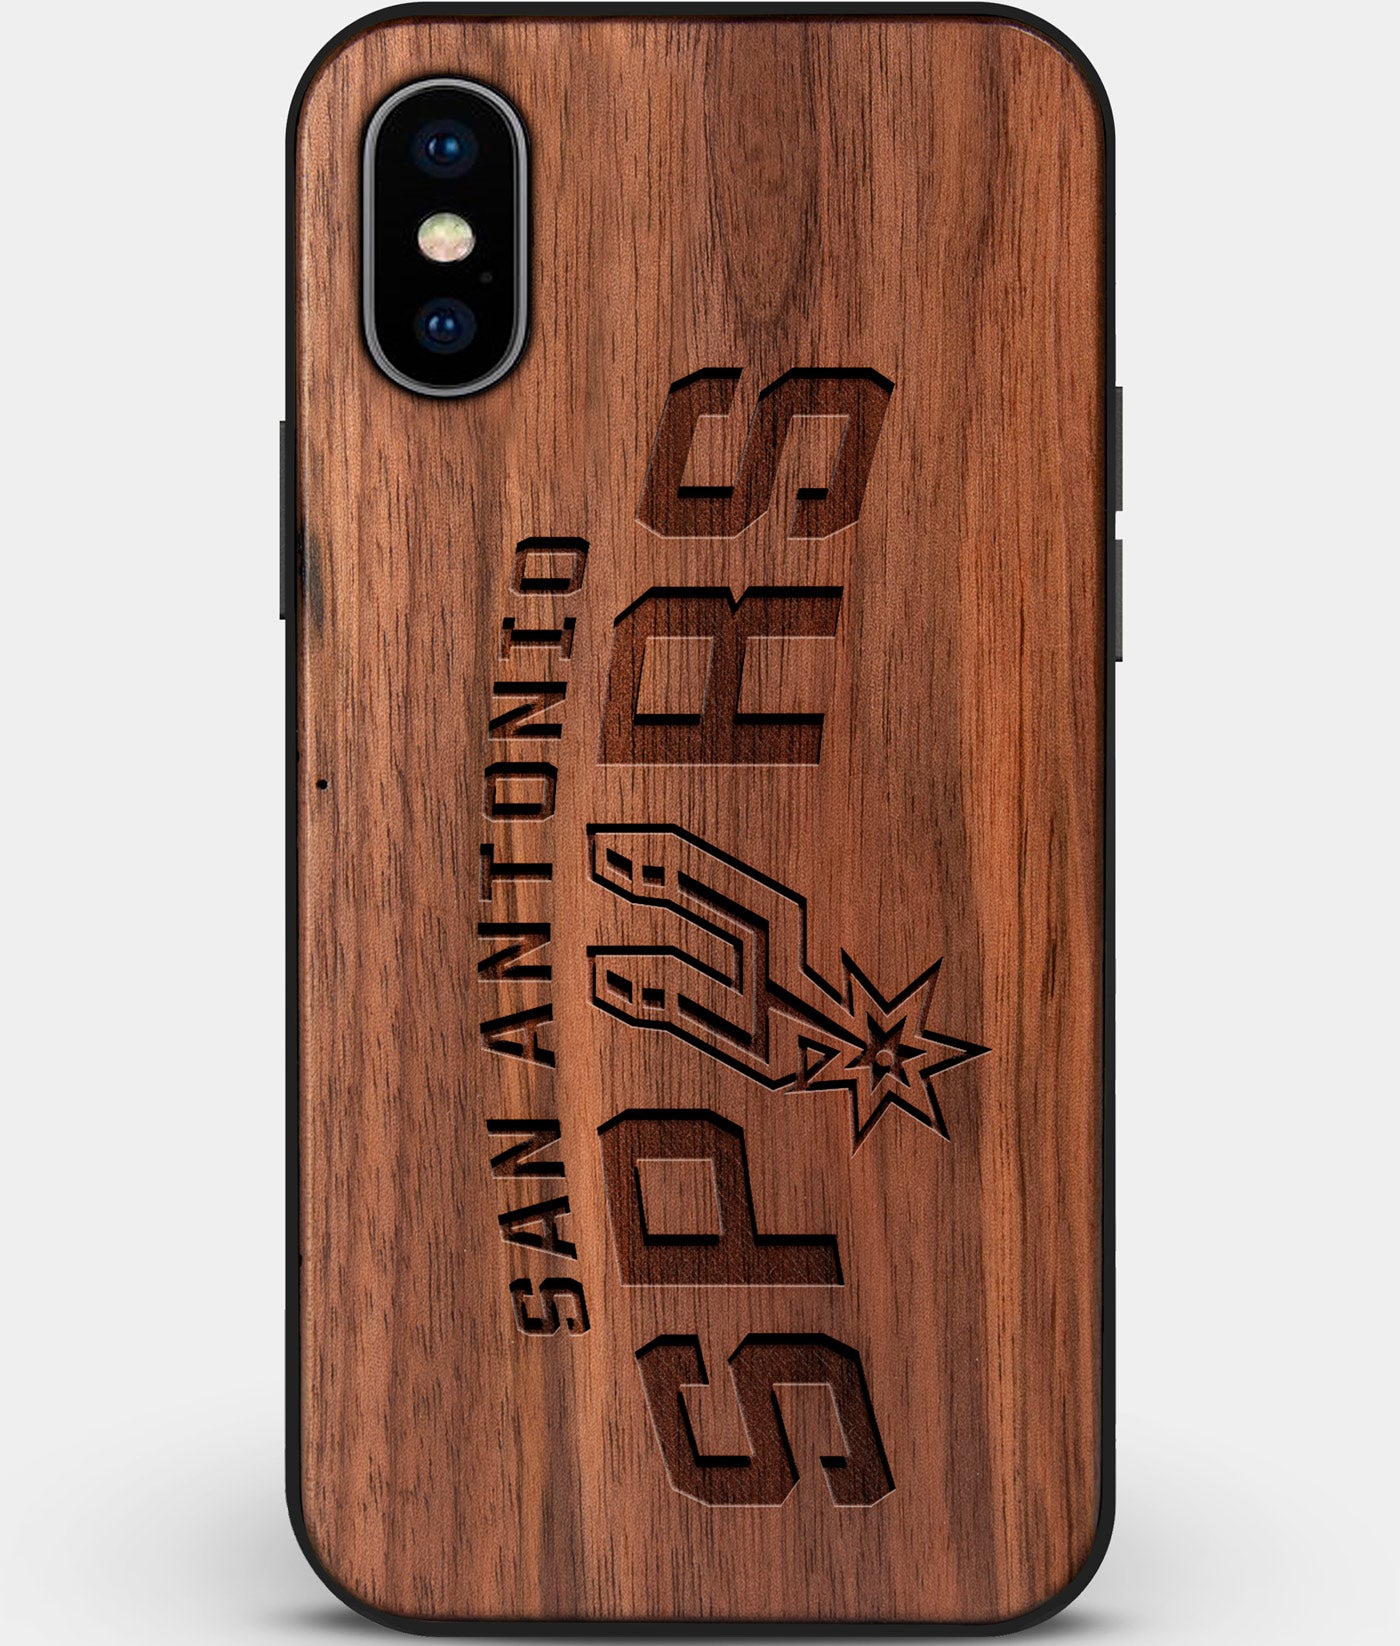 Custom Carved Wood San Antonio Spurs iPhone X/XS Case | Personalized Walnut Wood San Antonio Spurs Cover, Birthday Gift, Gifts For Him, Monogrammed Gift For Fan | by Engraved In Nature